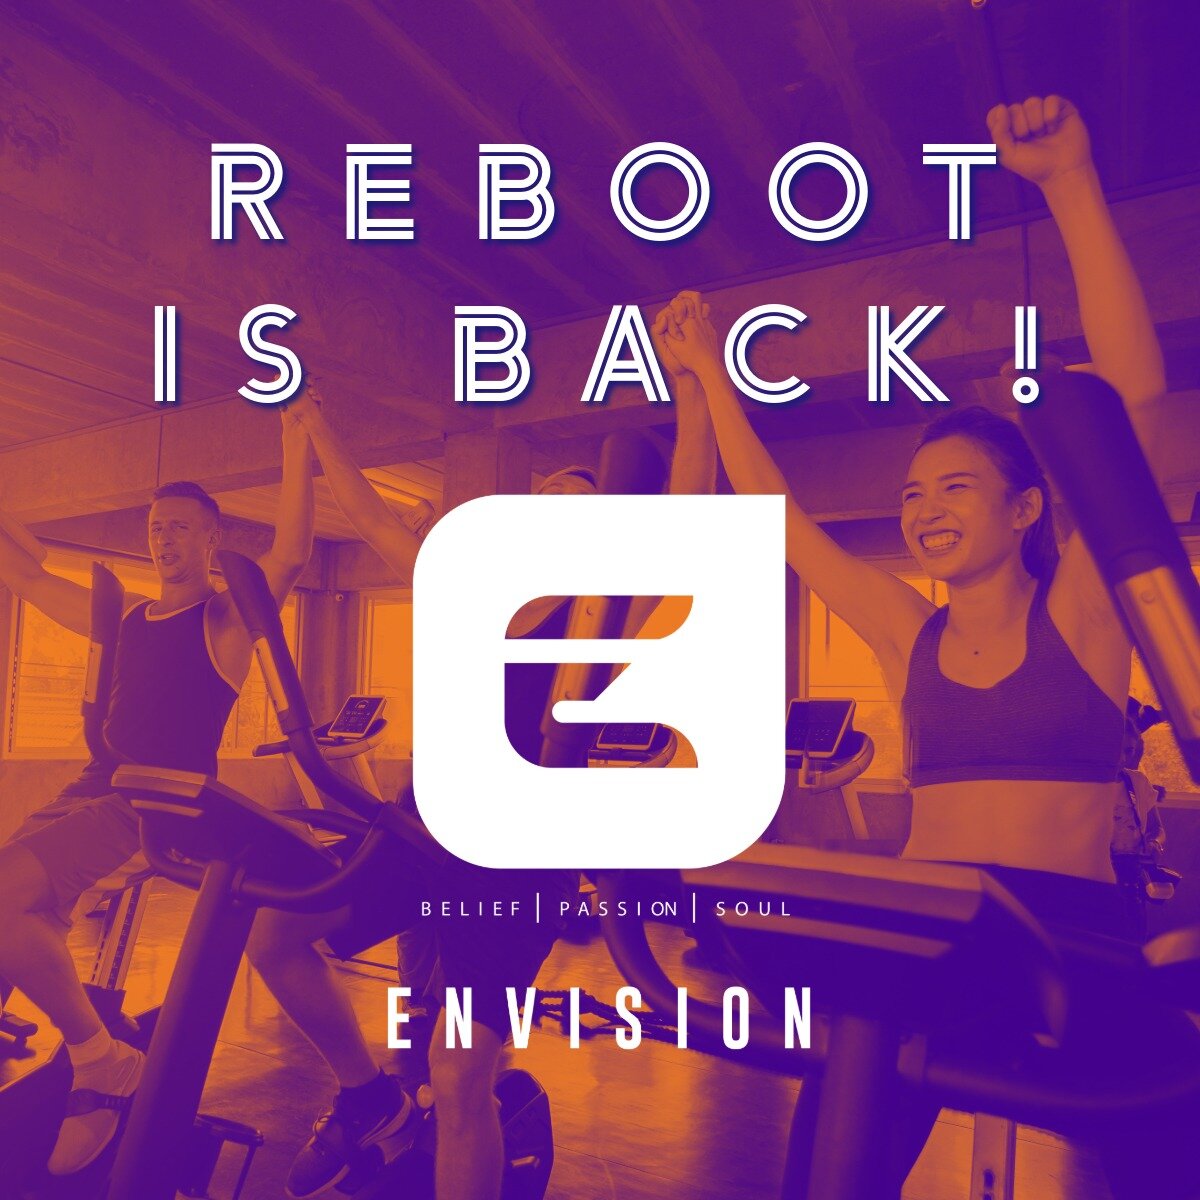 ReBoot is Back at Envision, launching this Saturday! Mark your calendars each quarter - Feb. 10 / April 13 / July 13 / Oct. 12!

Join us to revitalize your resolutions! Every ReBoot, kickstart your motivation at Envision with a spirited workout at 9a